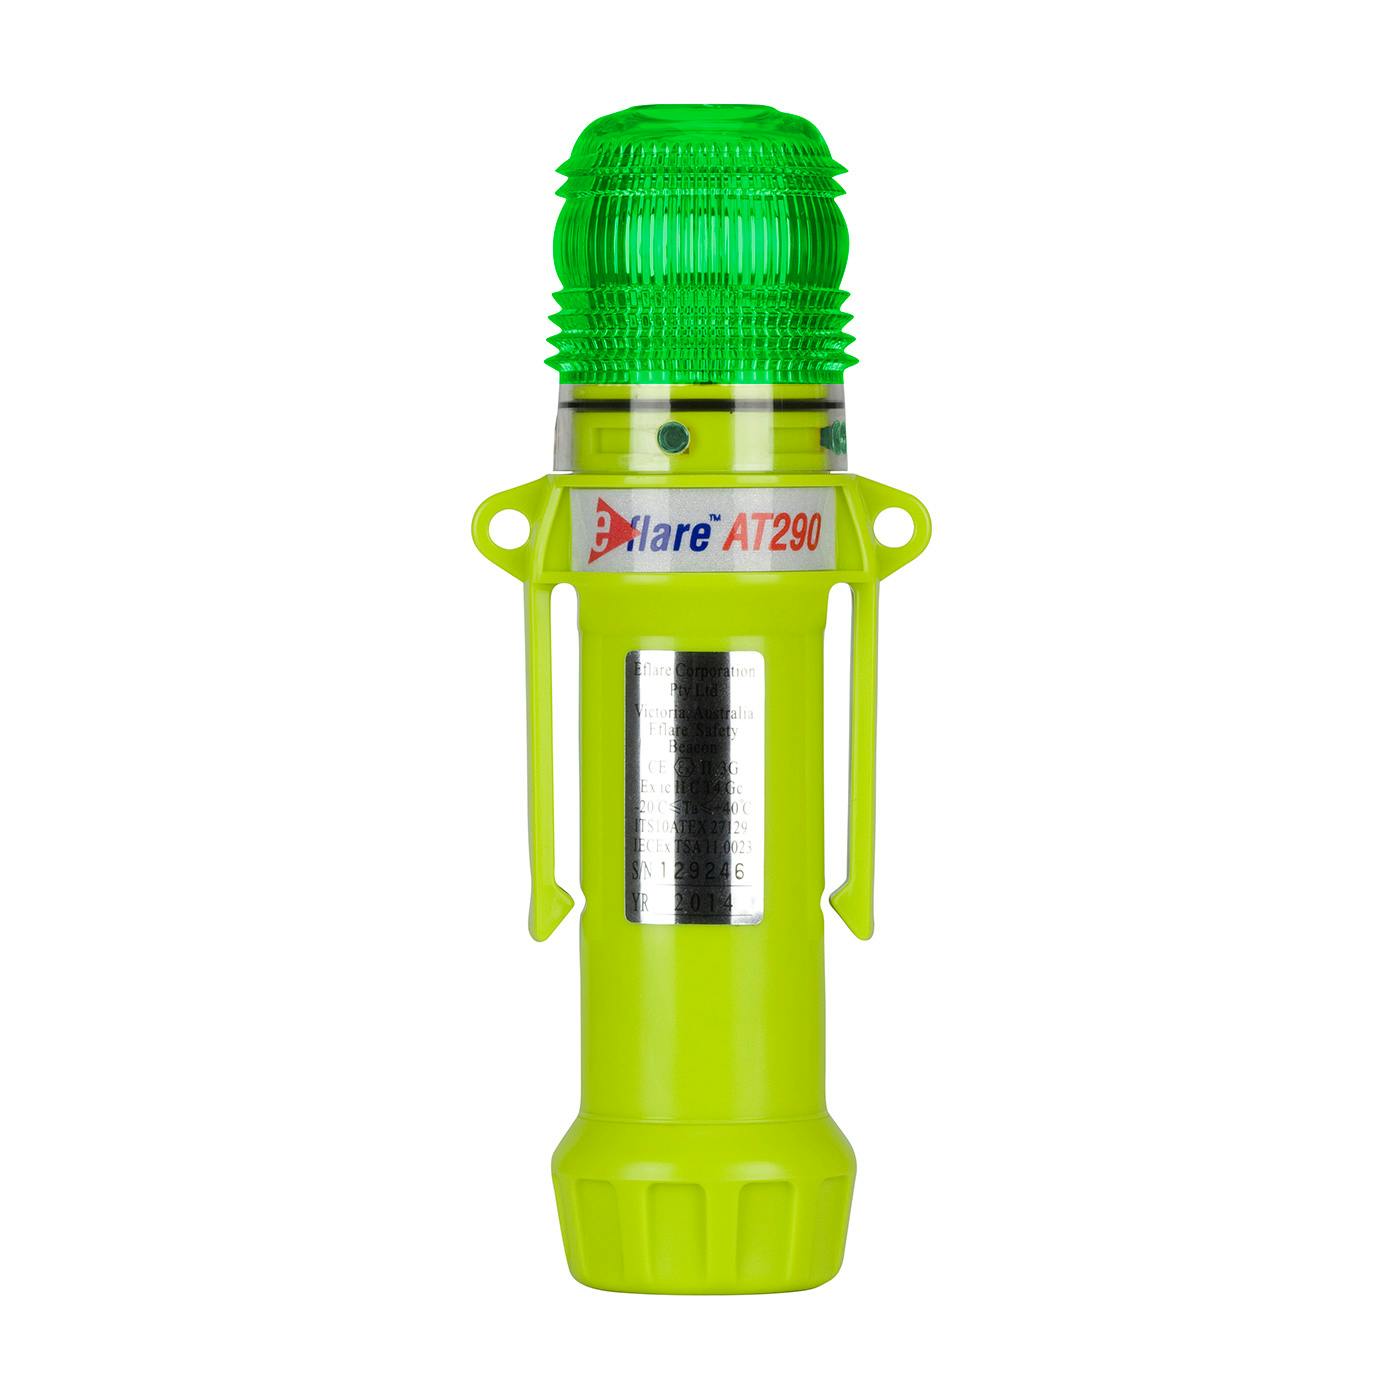 8" Safety & Emergency Beacon - Flashing / Steady-On Green, Green (939-AT290-G) - 8_0